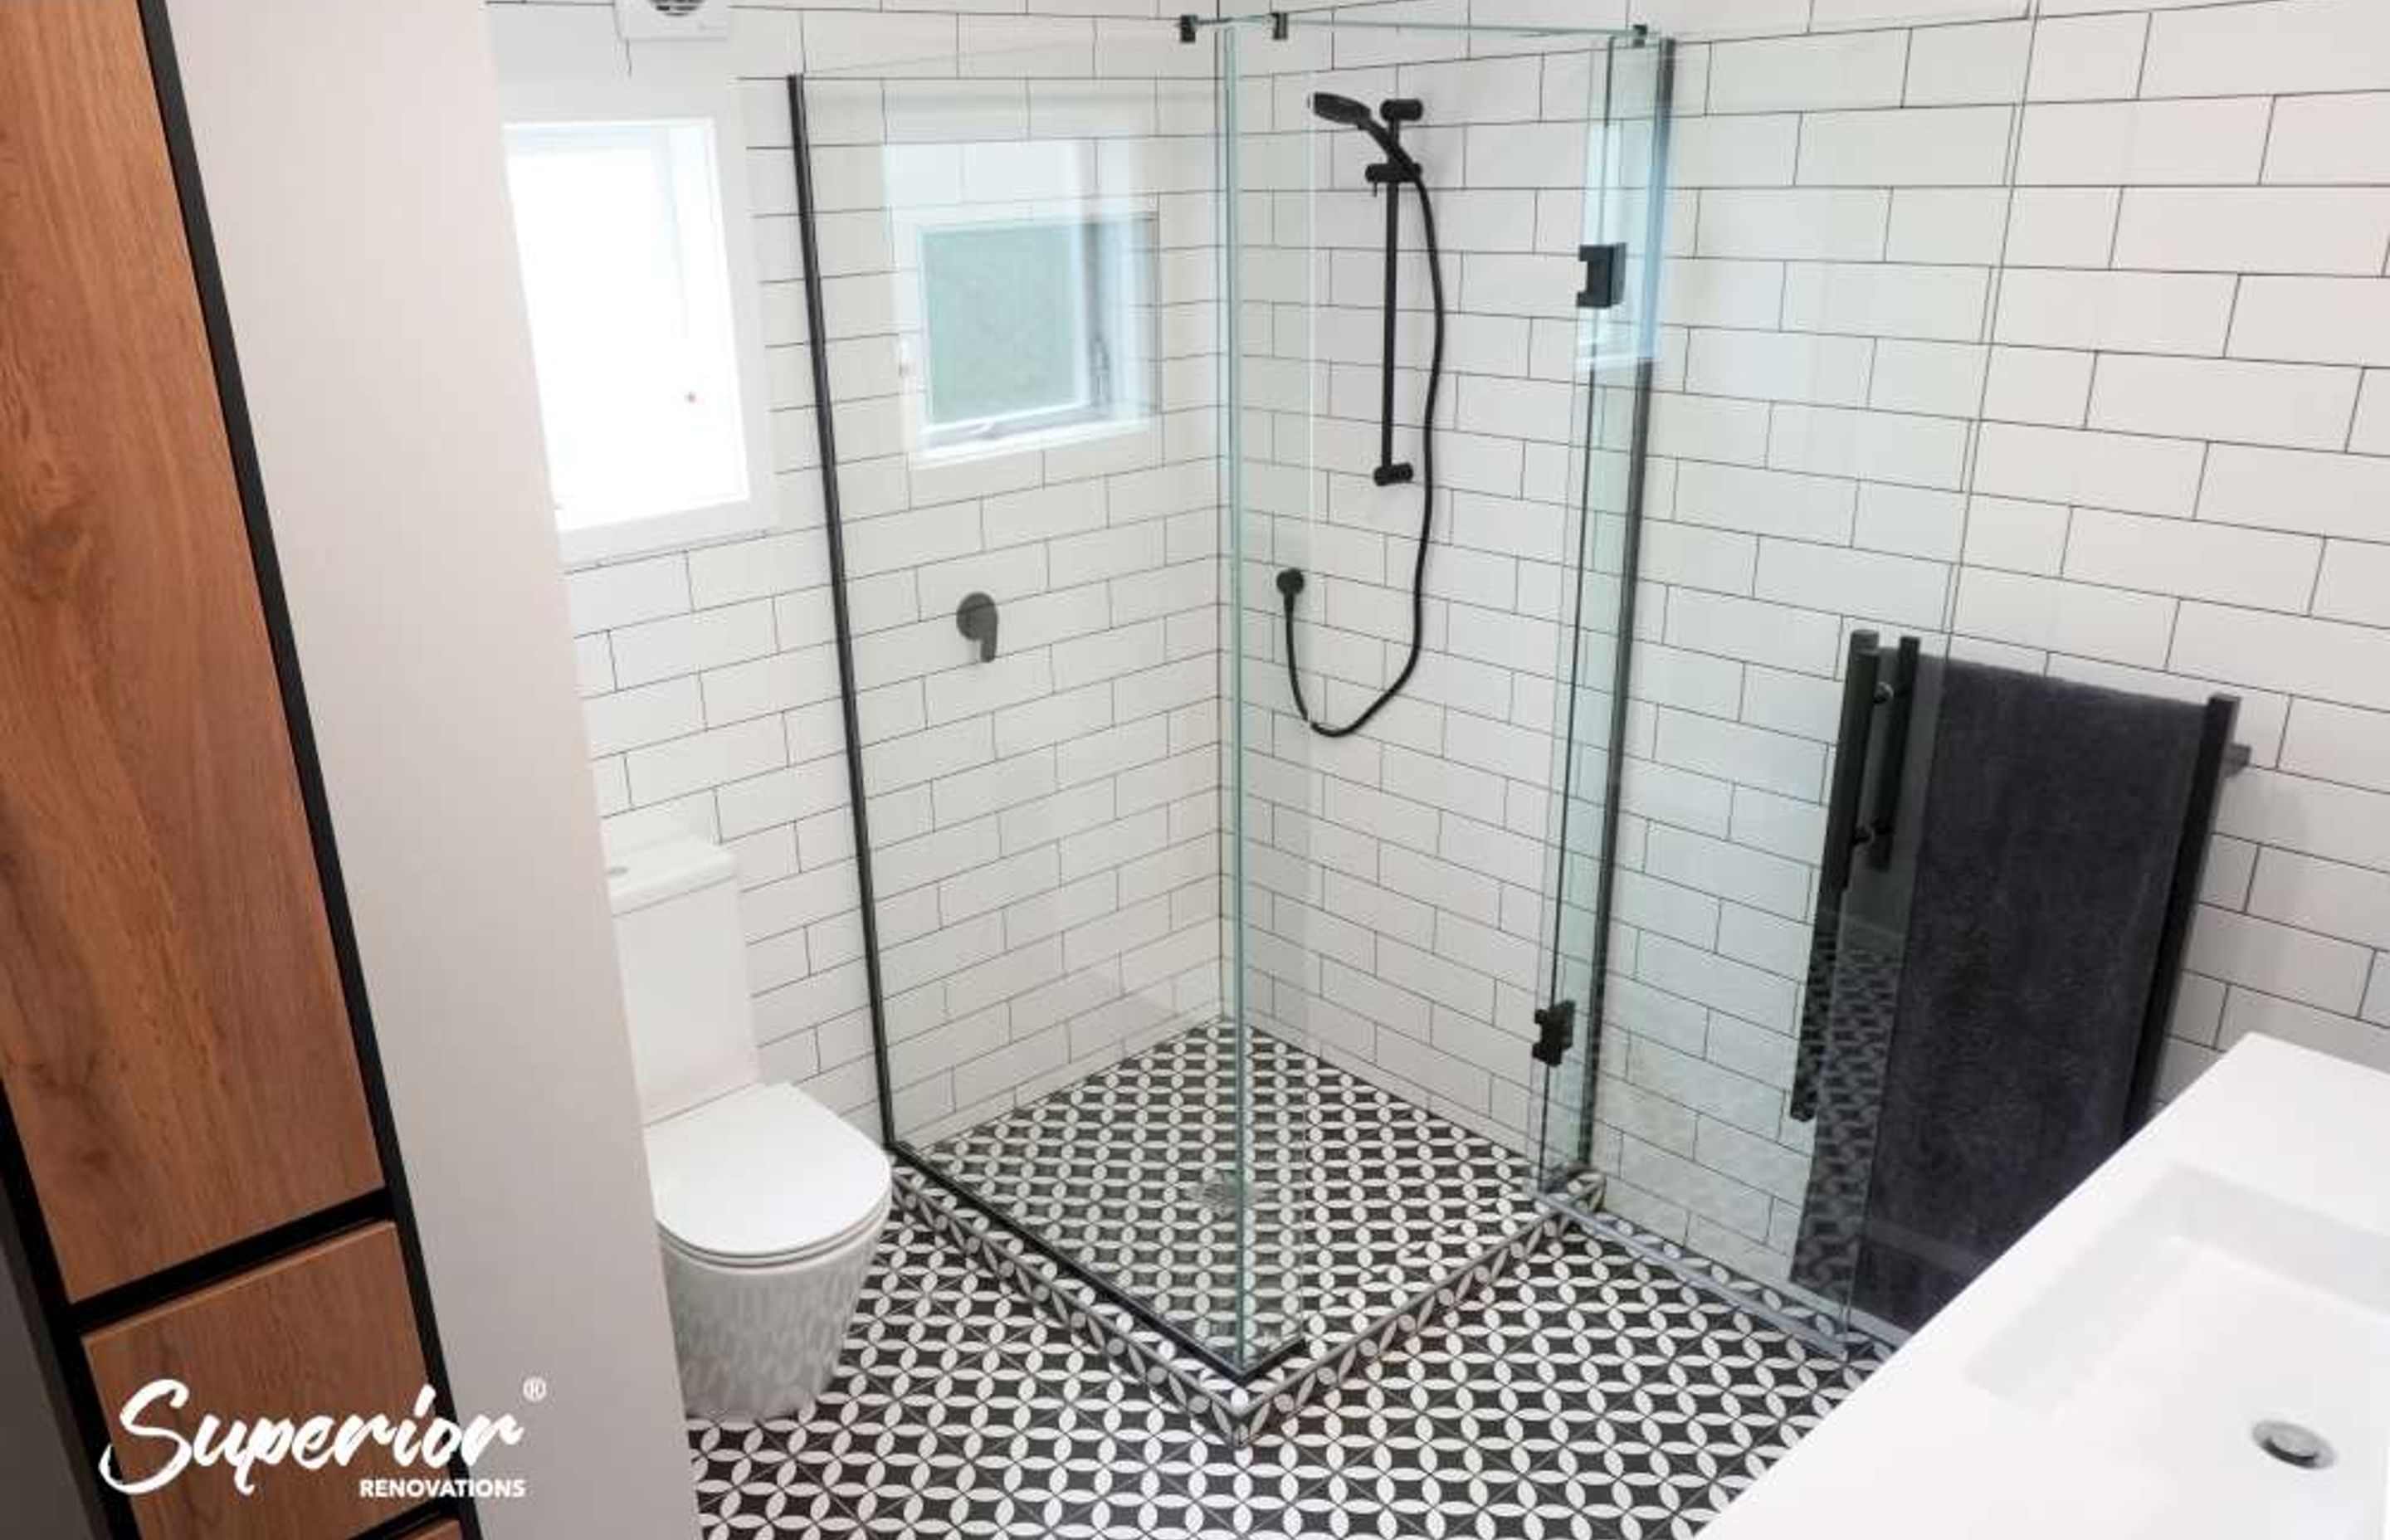 This is a great example of a shower in a small bathroom. The floor and wall tiles are carried forward into the shower to create continuity. This bathroom is a great example of how a well designed and planned bathroom can create an illusion of space.